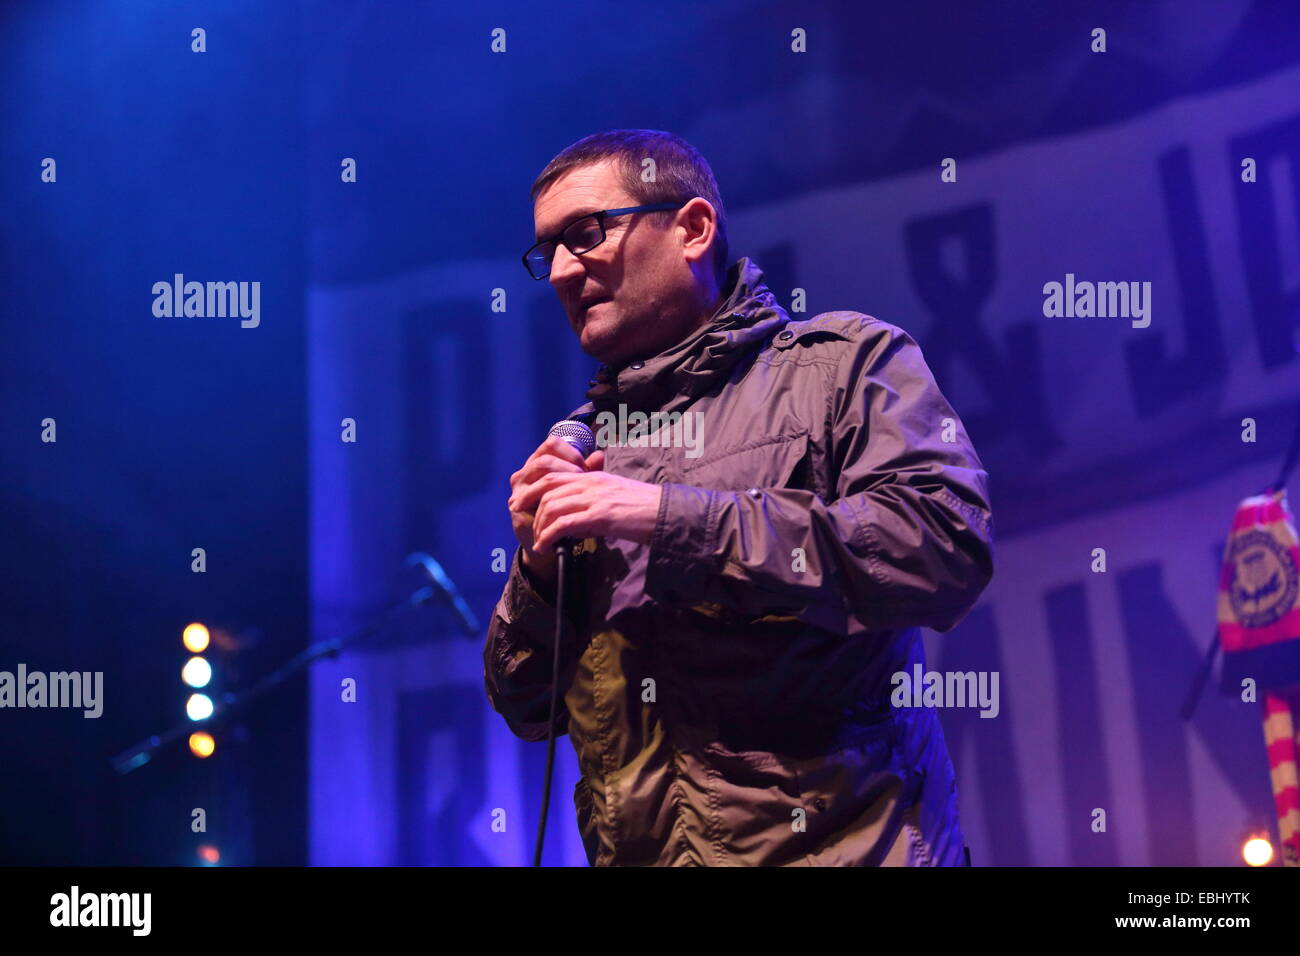 Warrington, Cheshire, UK. 1st December, 2014. Paul Heaton and Jacqui Abbott formerly of the Beautiful South performed live in front of a sold out crowd at the Parr Hall in Warrington, Cheshire Credit:  Simon Newbury/Alamy Live News Stock Photo